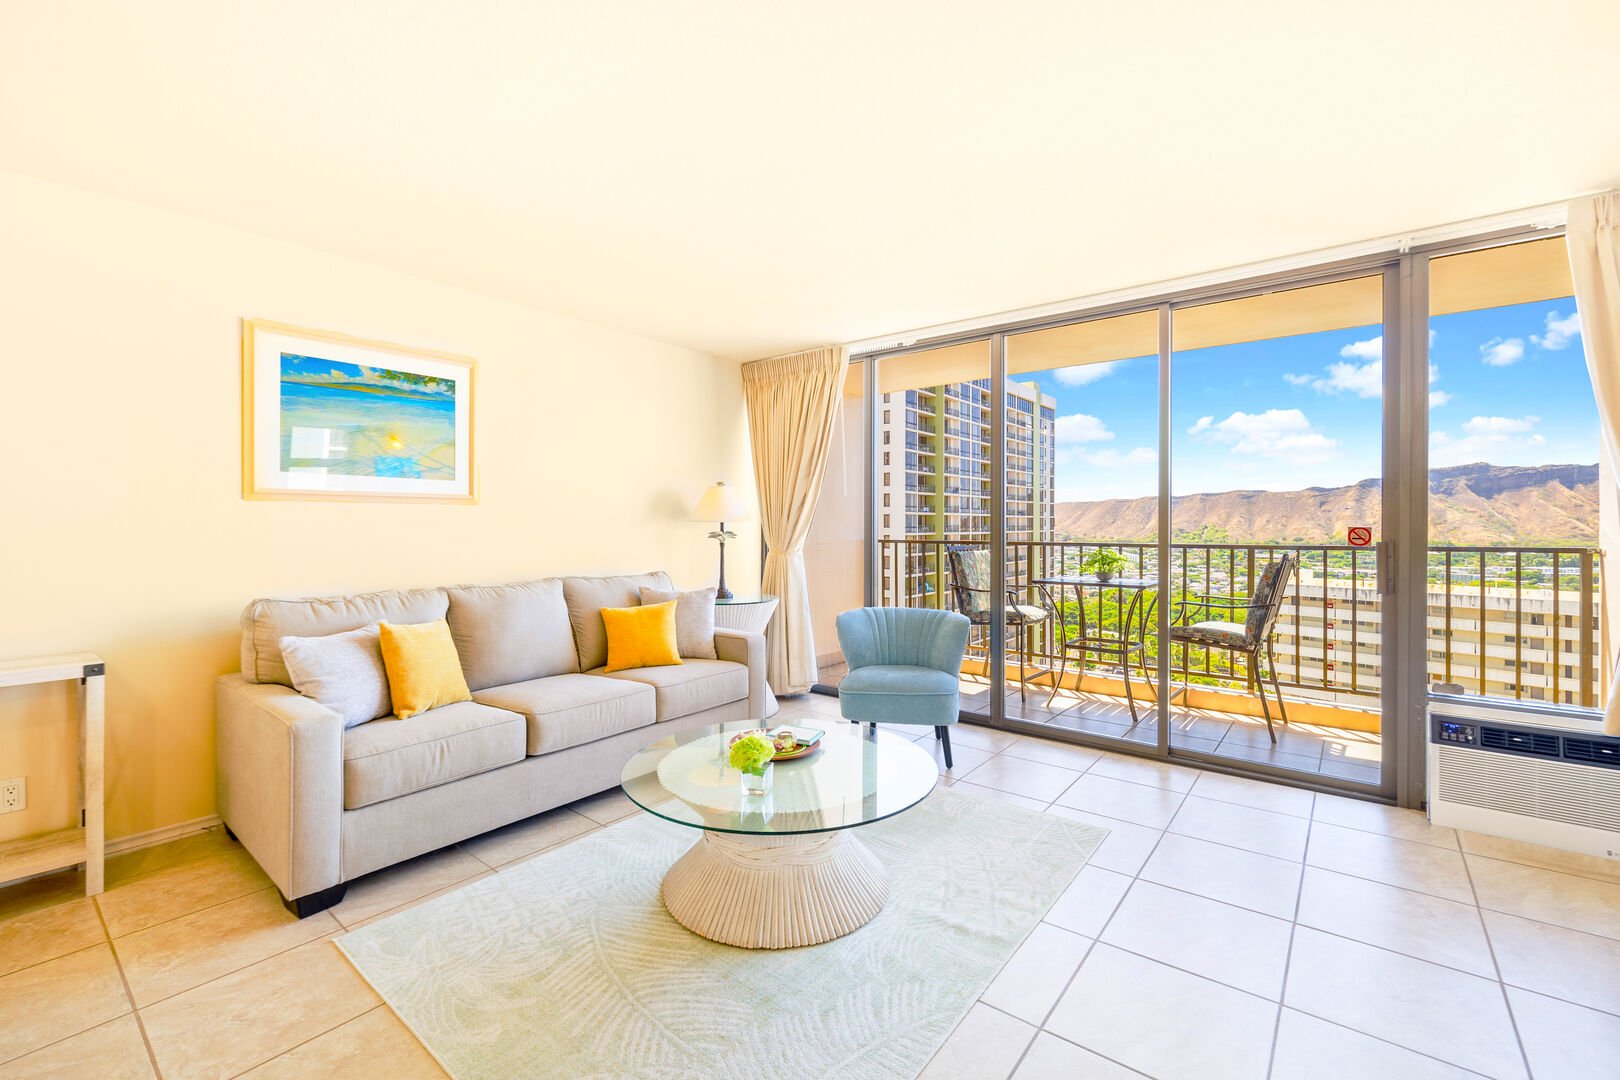 Enjoy the view of the Diamond Head mountain while resting on the new queen-size sleeper sofa in the living room!